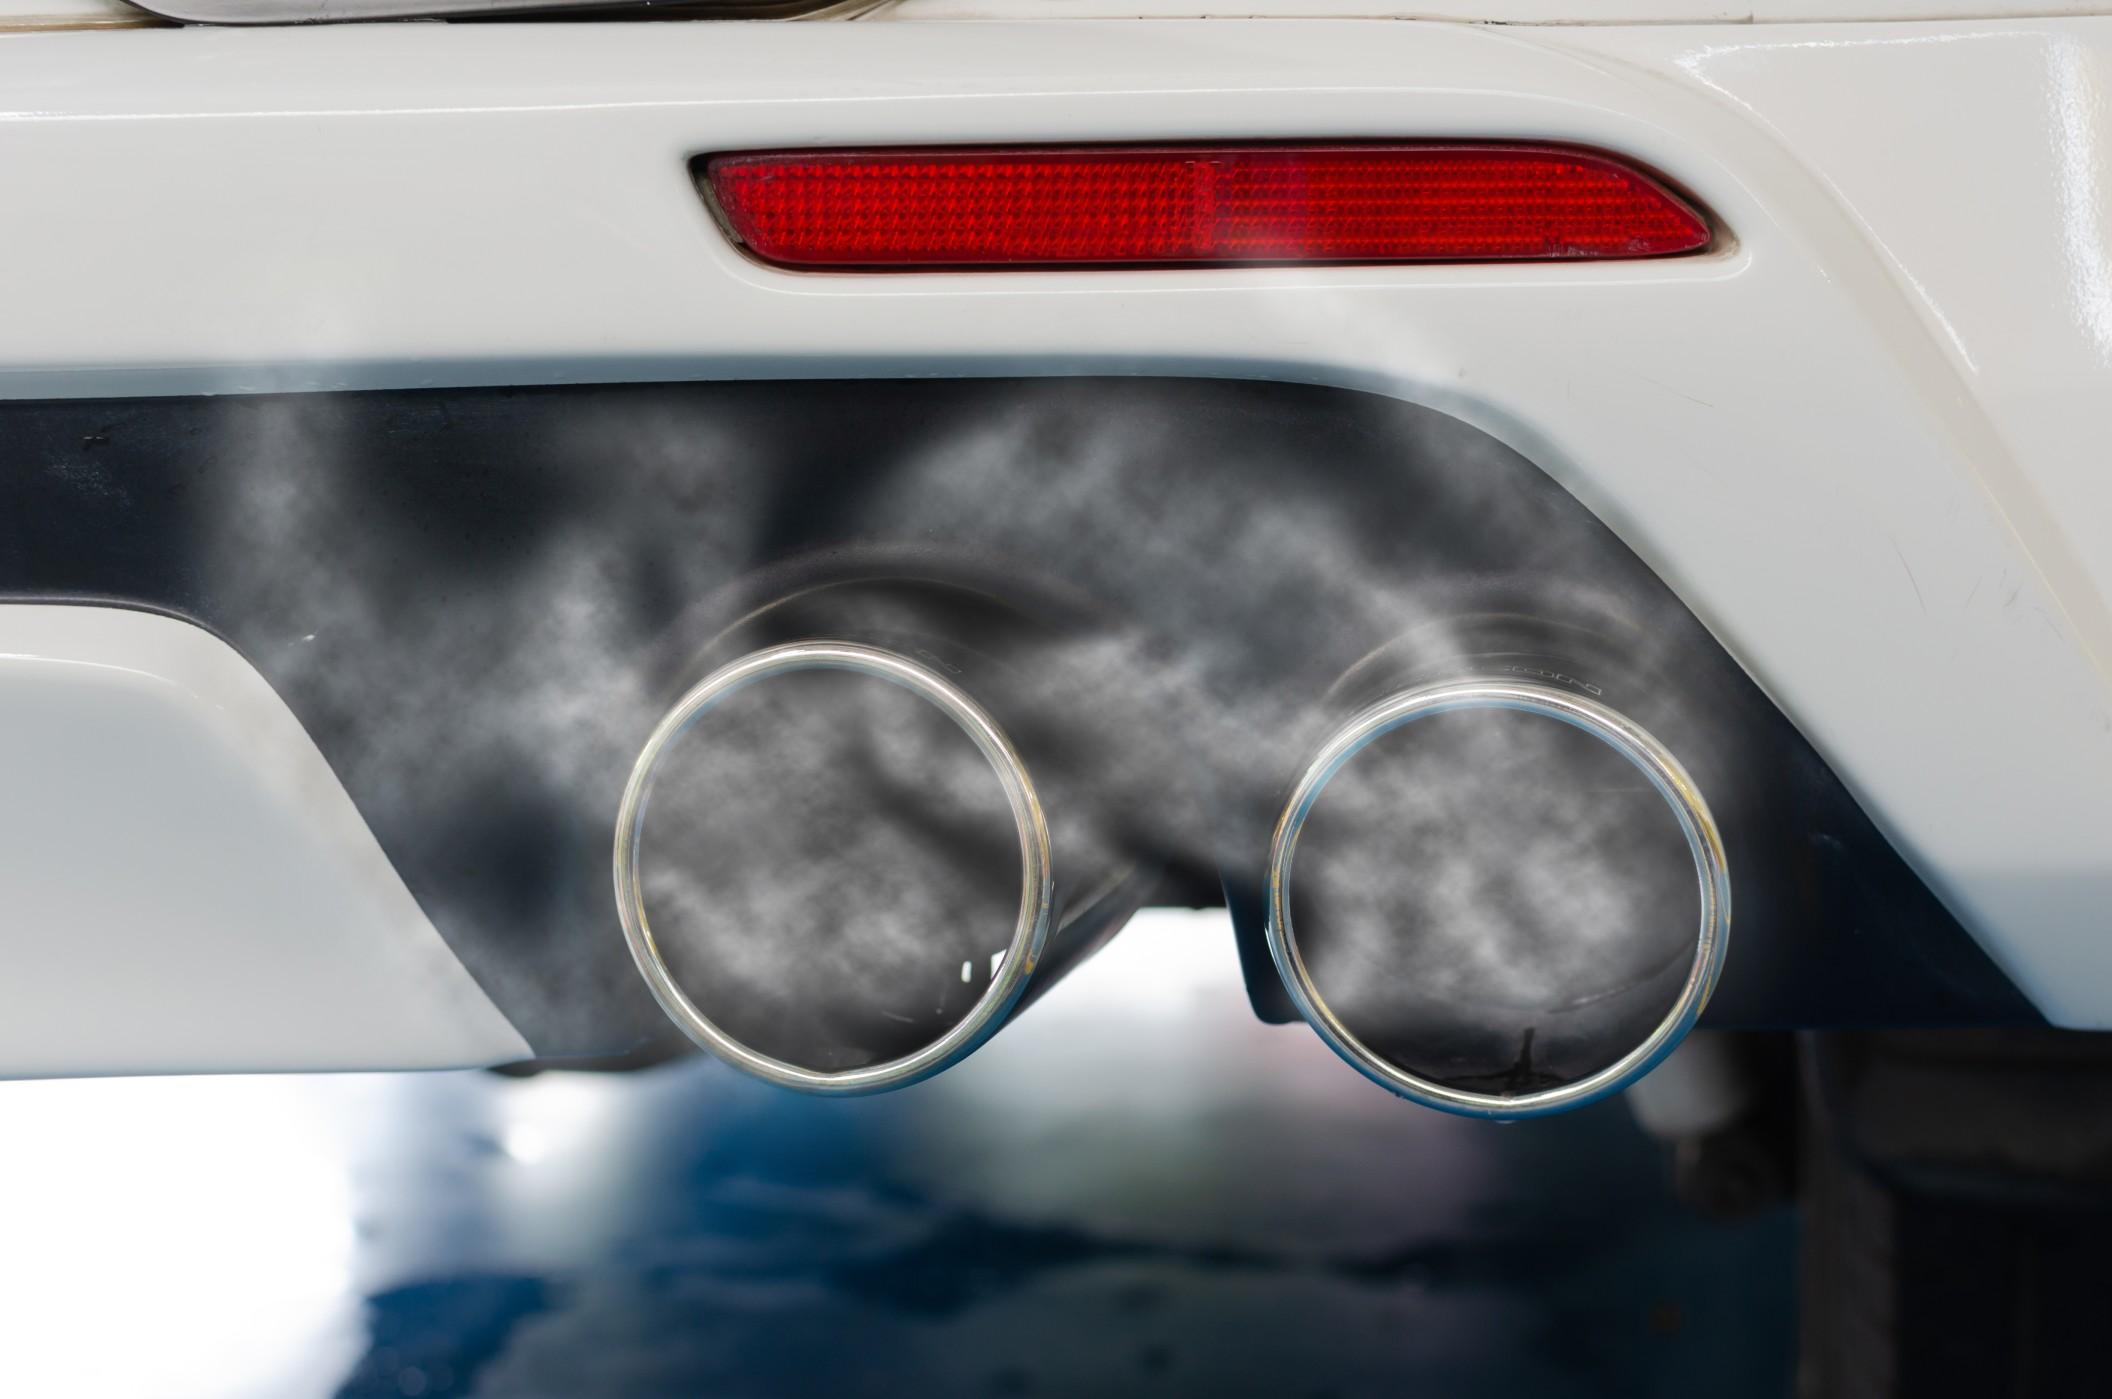 Exhaust modifications are popular but not everyone is a fan | Twenty20